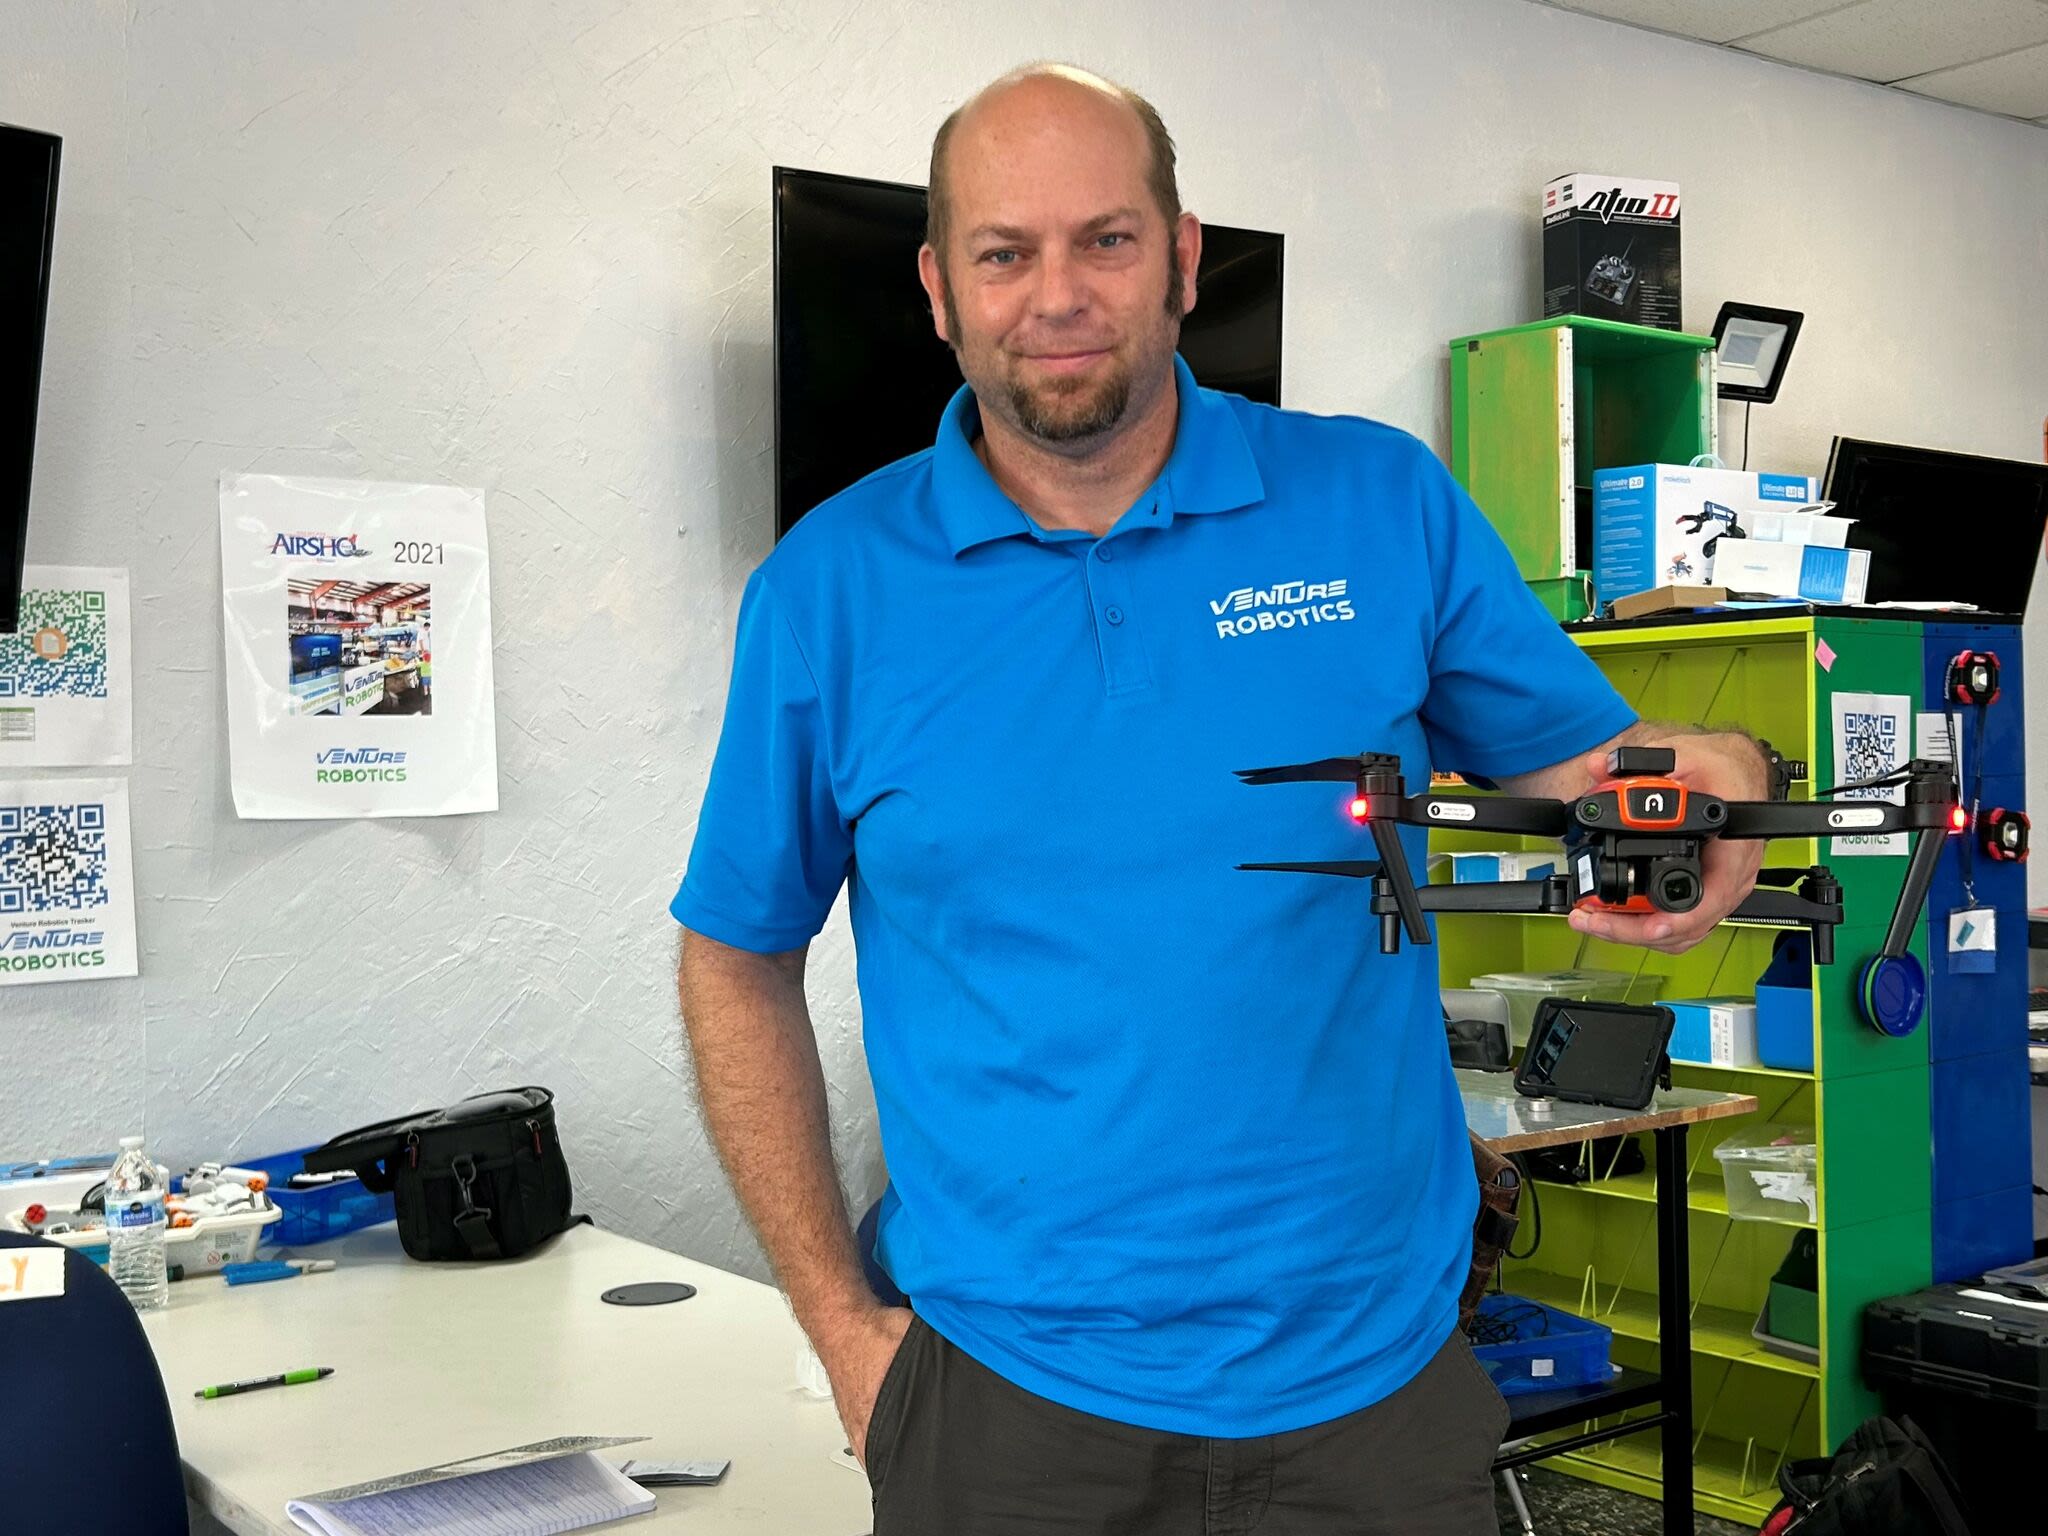 Midlander is providing drone pilot training as use expands